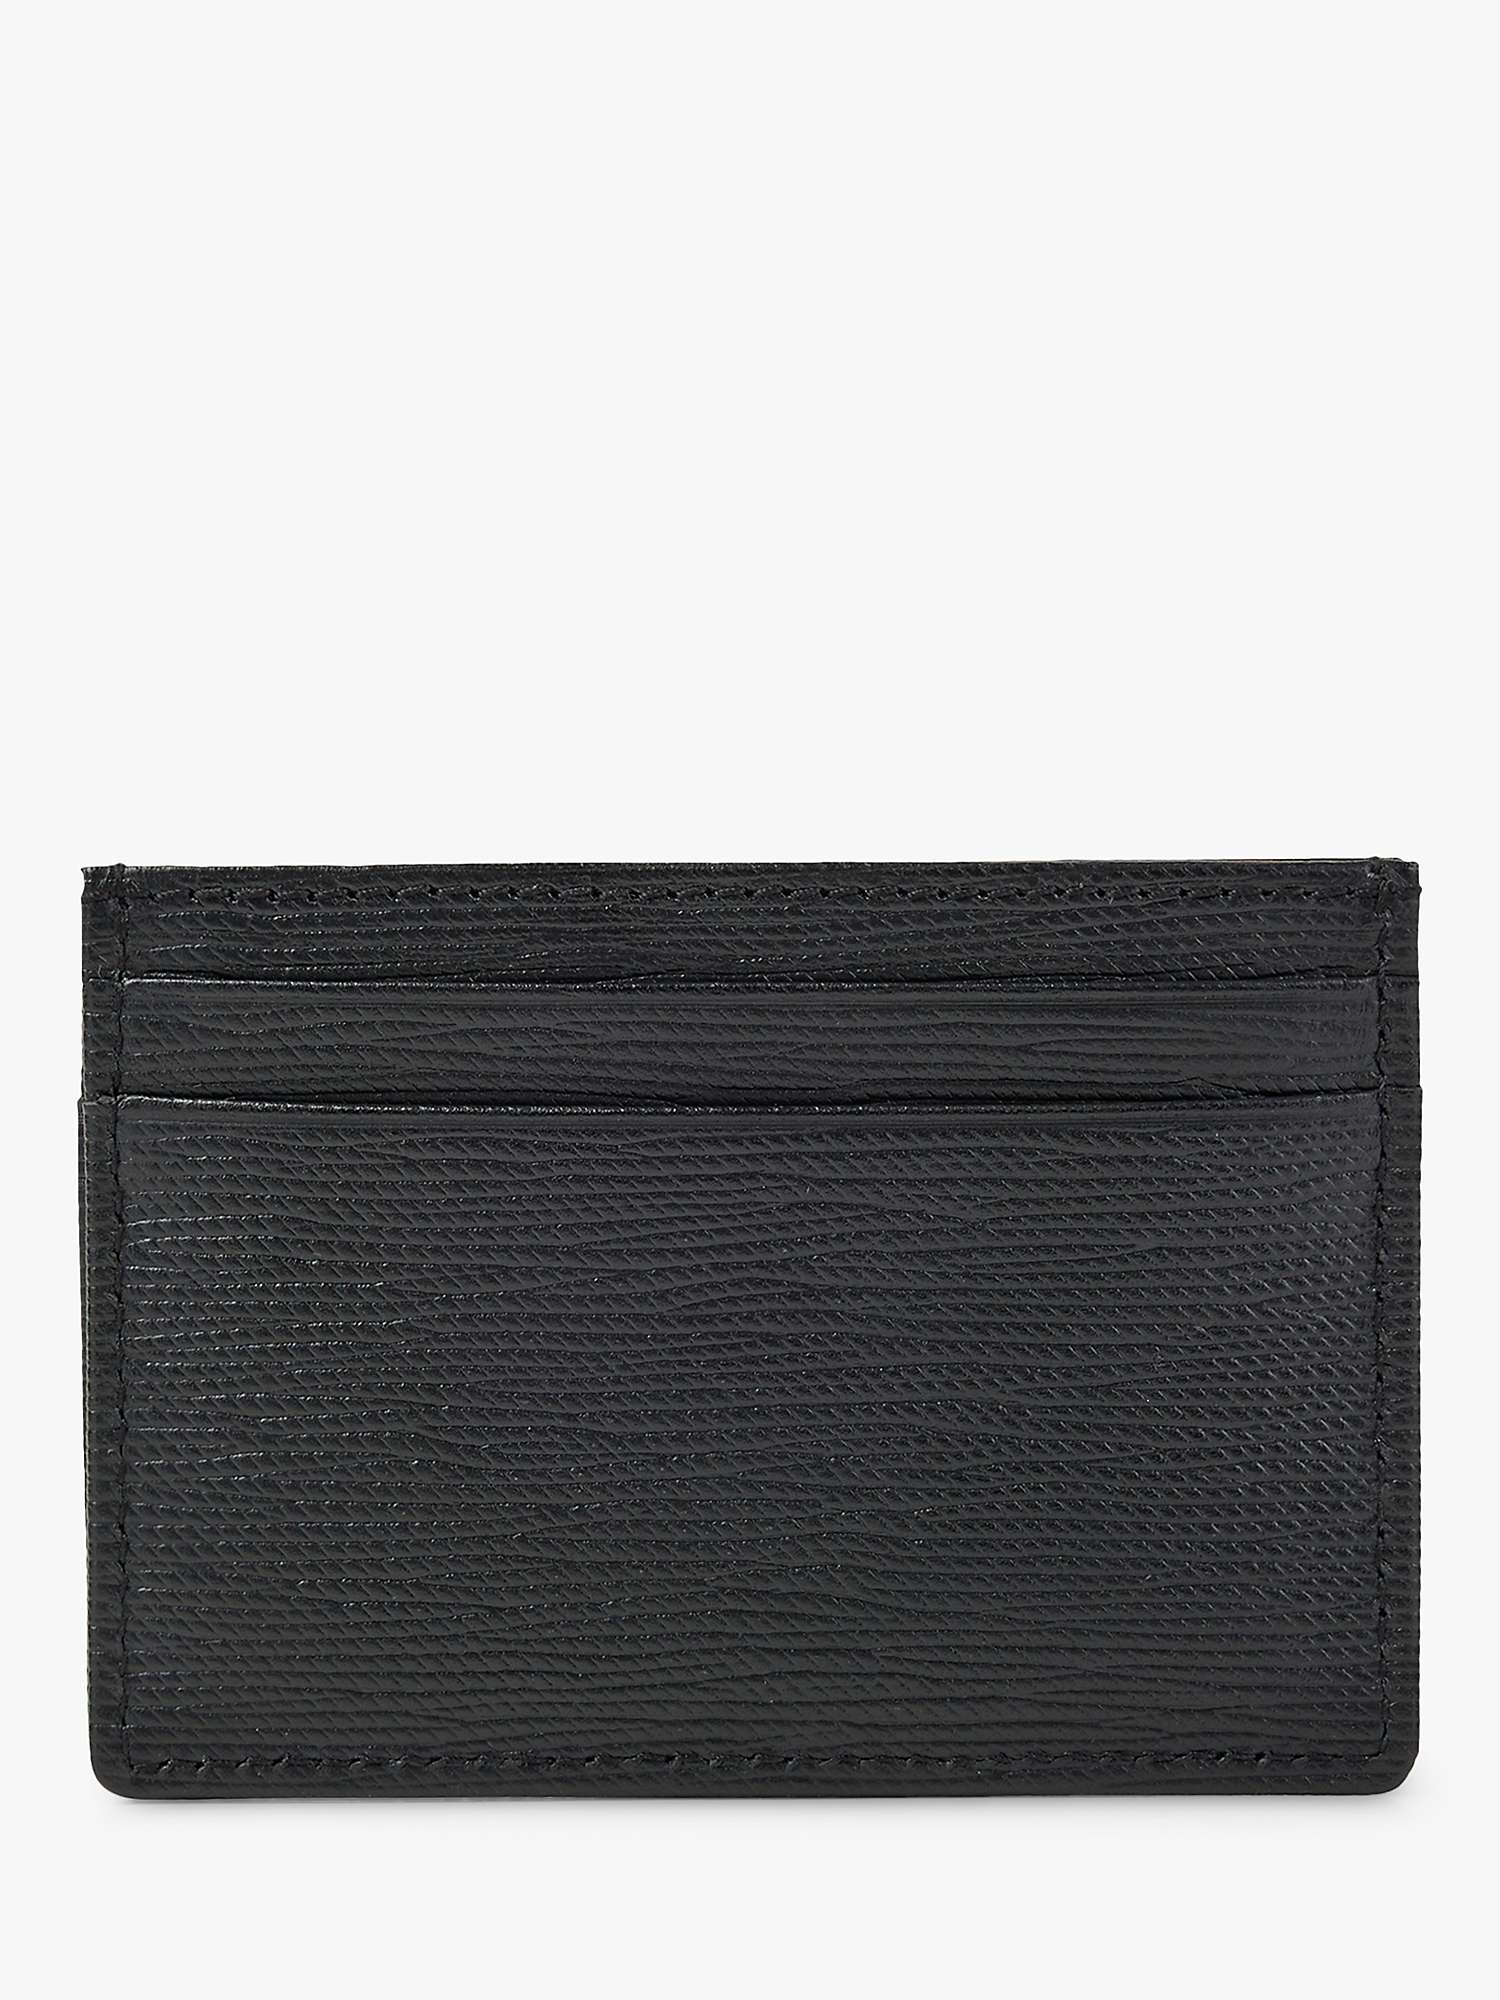 Buy BOSS Gallery Tumbled Leather Card Holder, Black Online at johnlewis.com